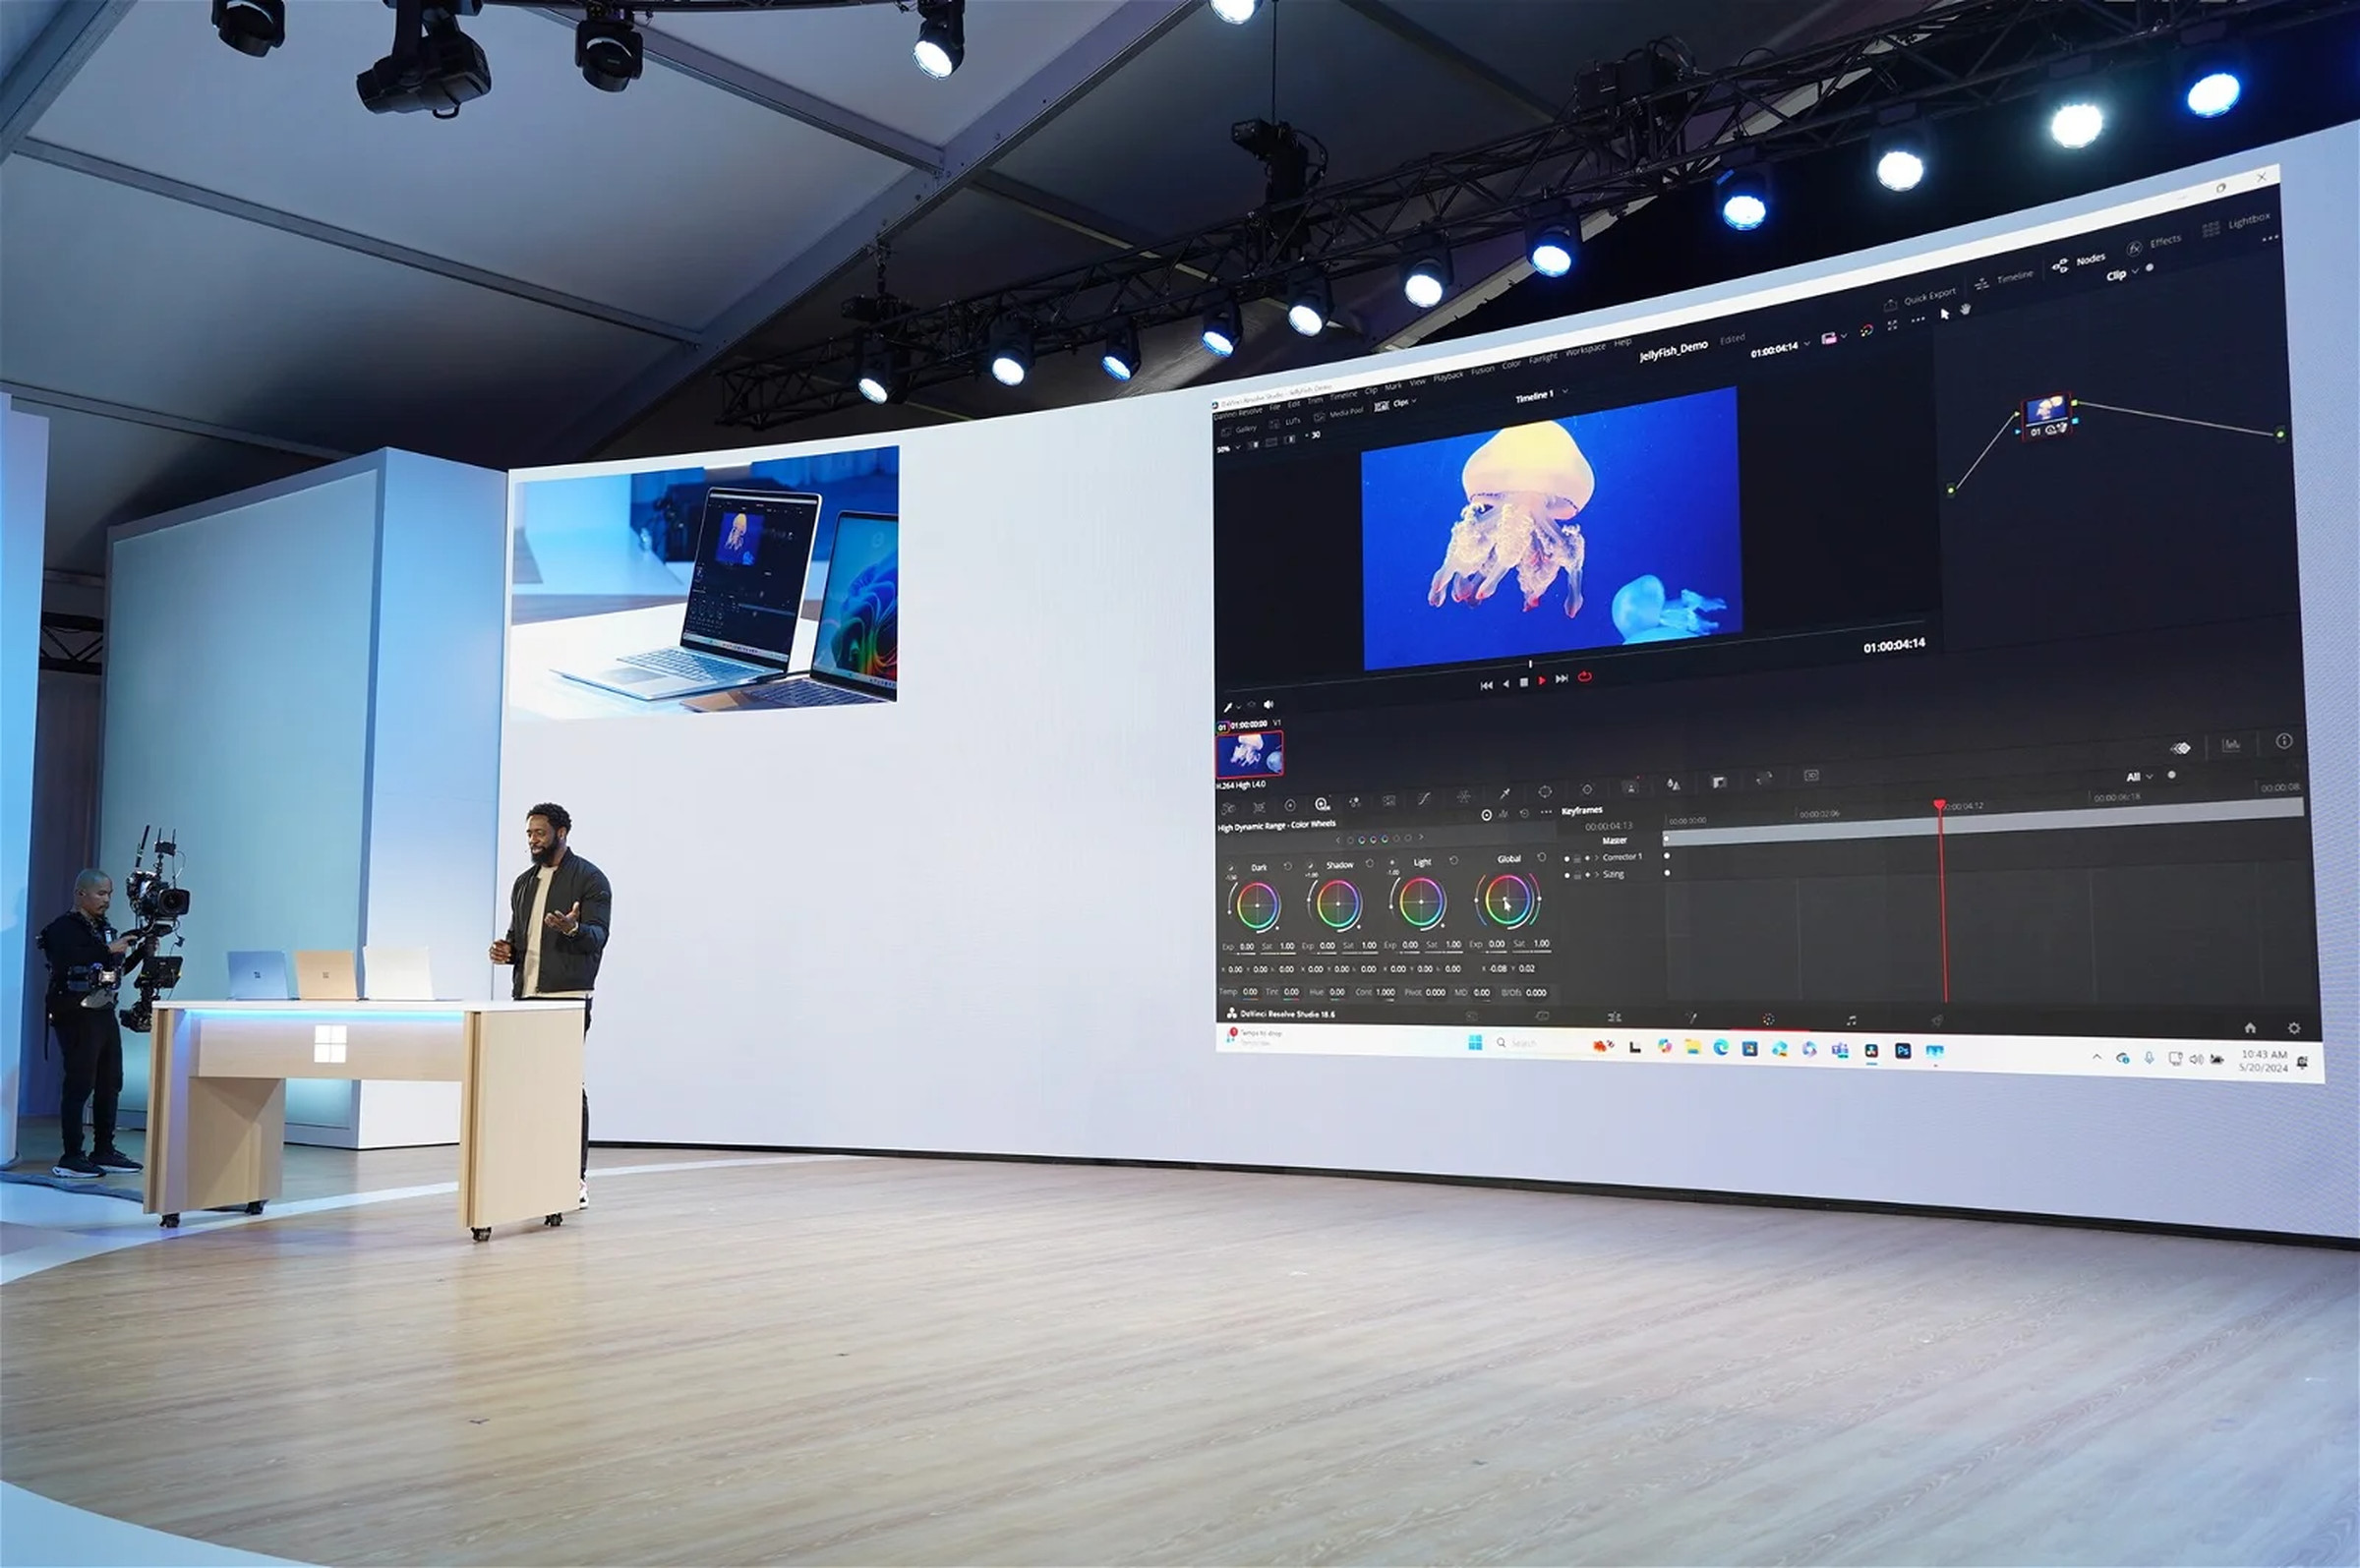 Davinci Resolve demo on stage at Microsoft Surface event